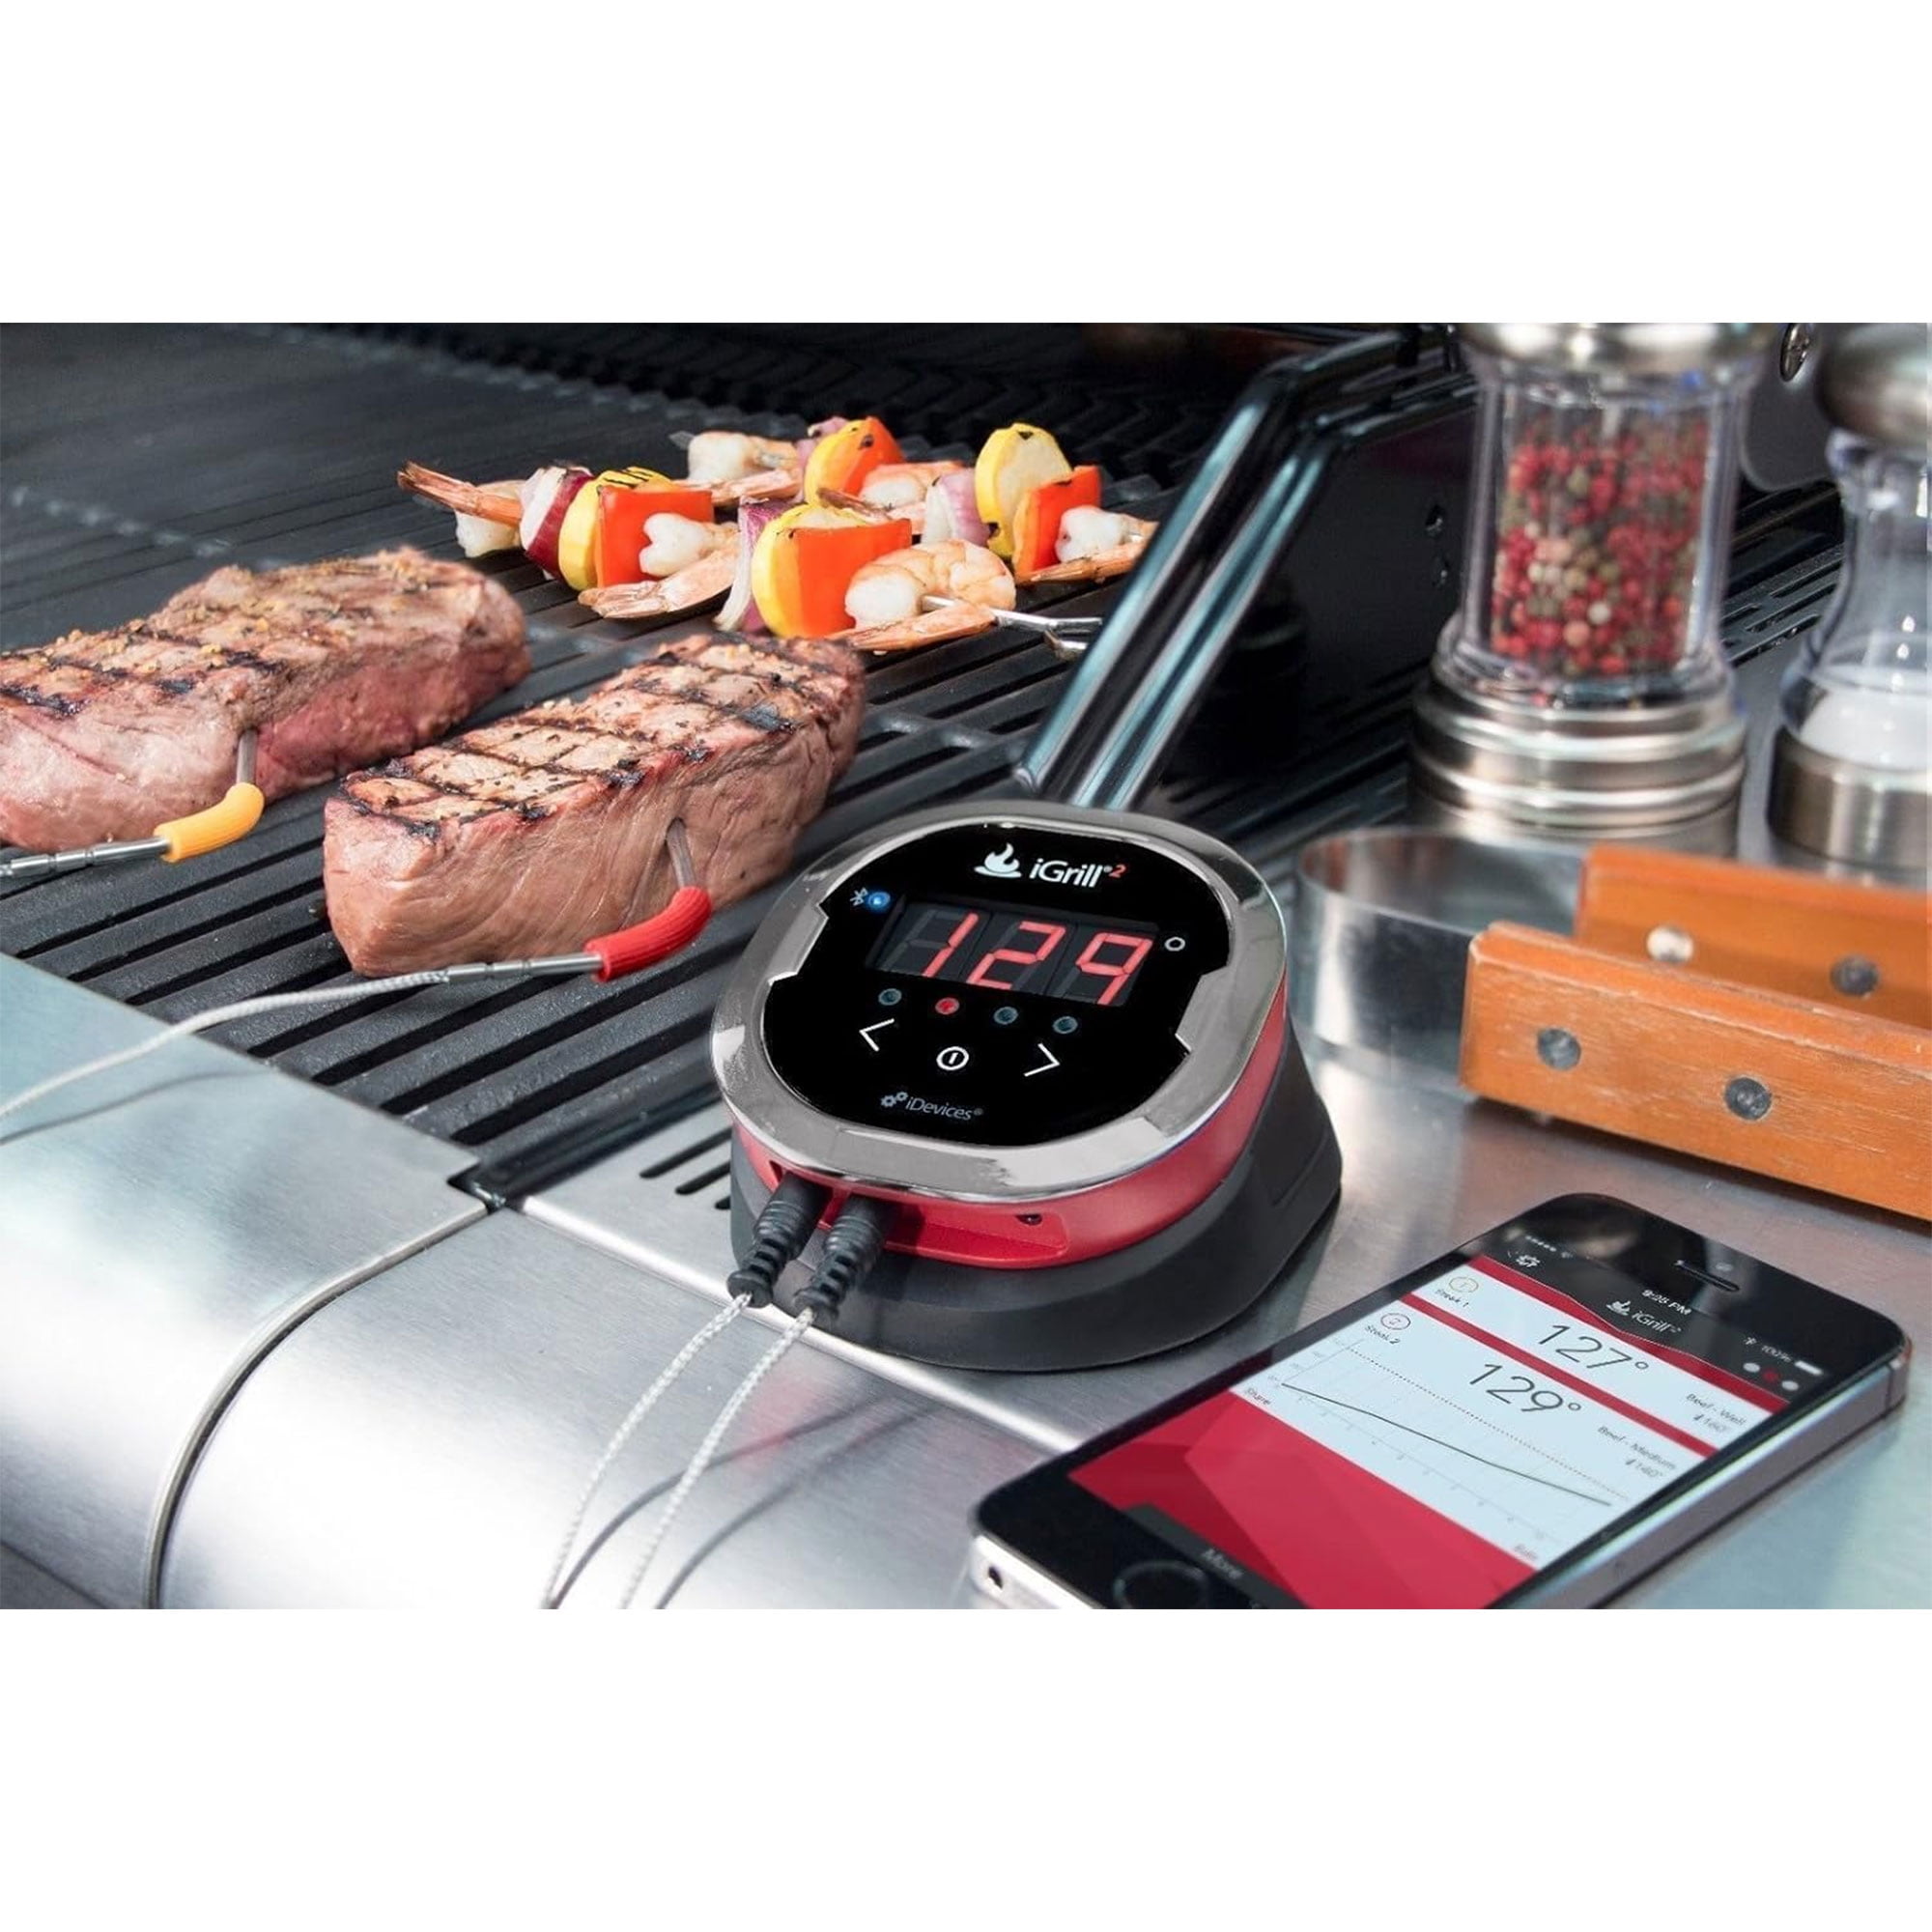 iDevices iGrill 2 Bluetooth Smart Meat Thermometer w/2 Color-Coded Meat  Probes, 200-Hour Battery Life, Illuminated Display and LED Temperature  Readout